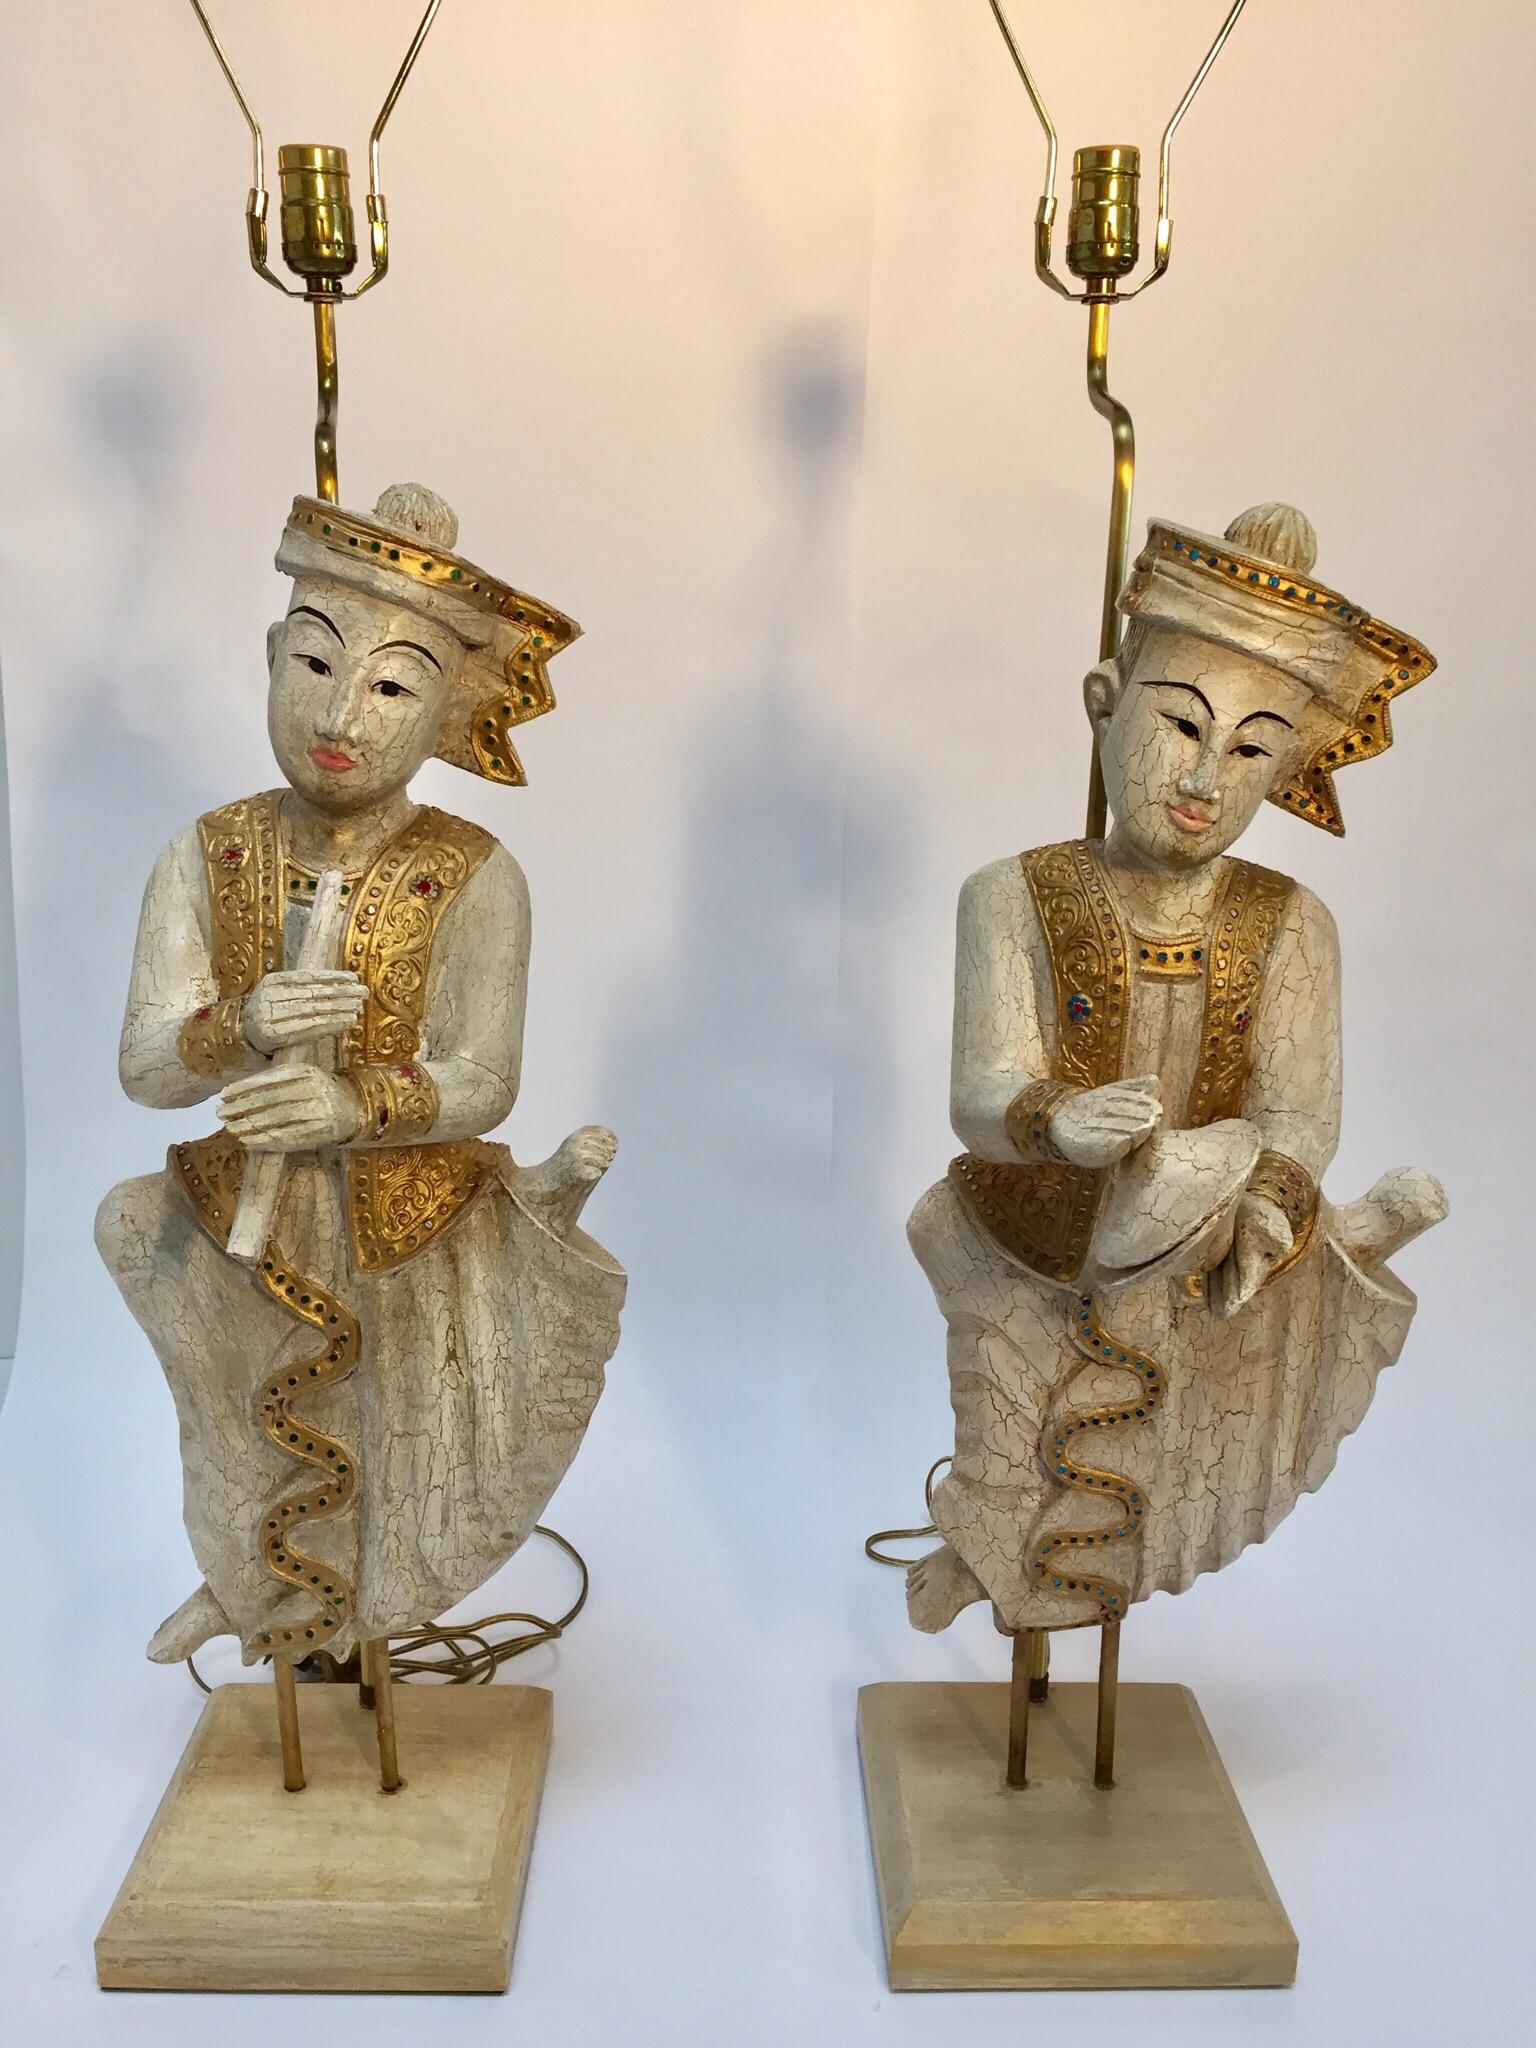 Hand-Carved Pair of Asian Figures of Burmese Musicians Turned into Table Lamps For Sale